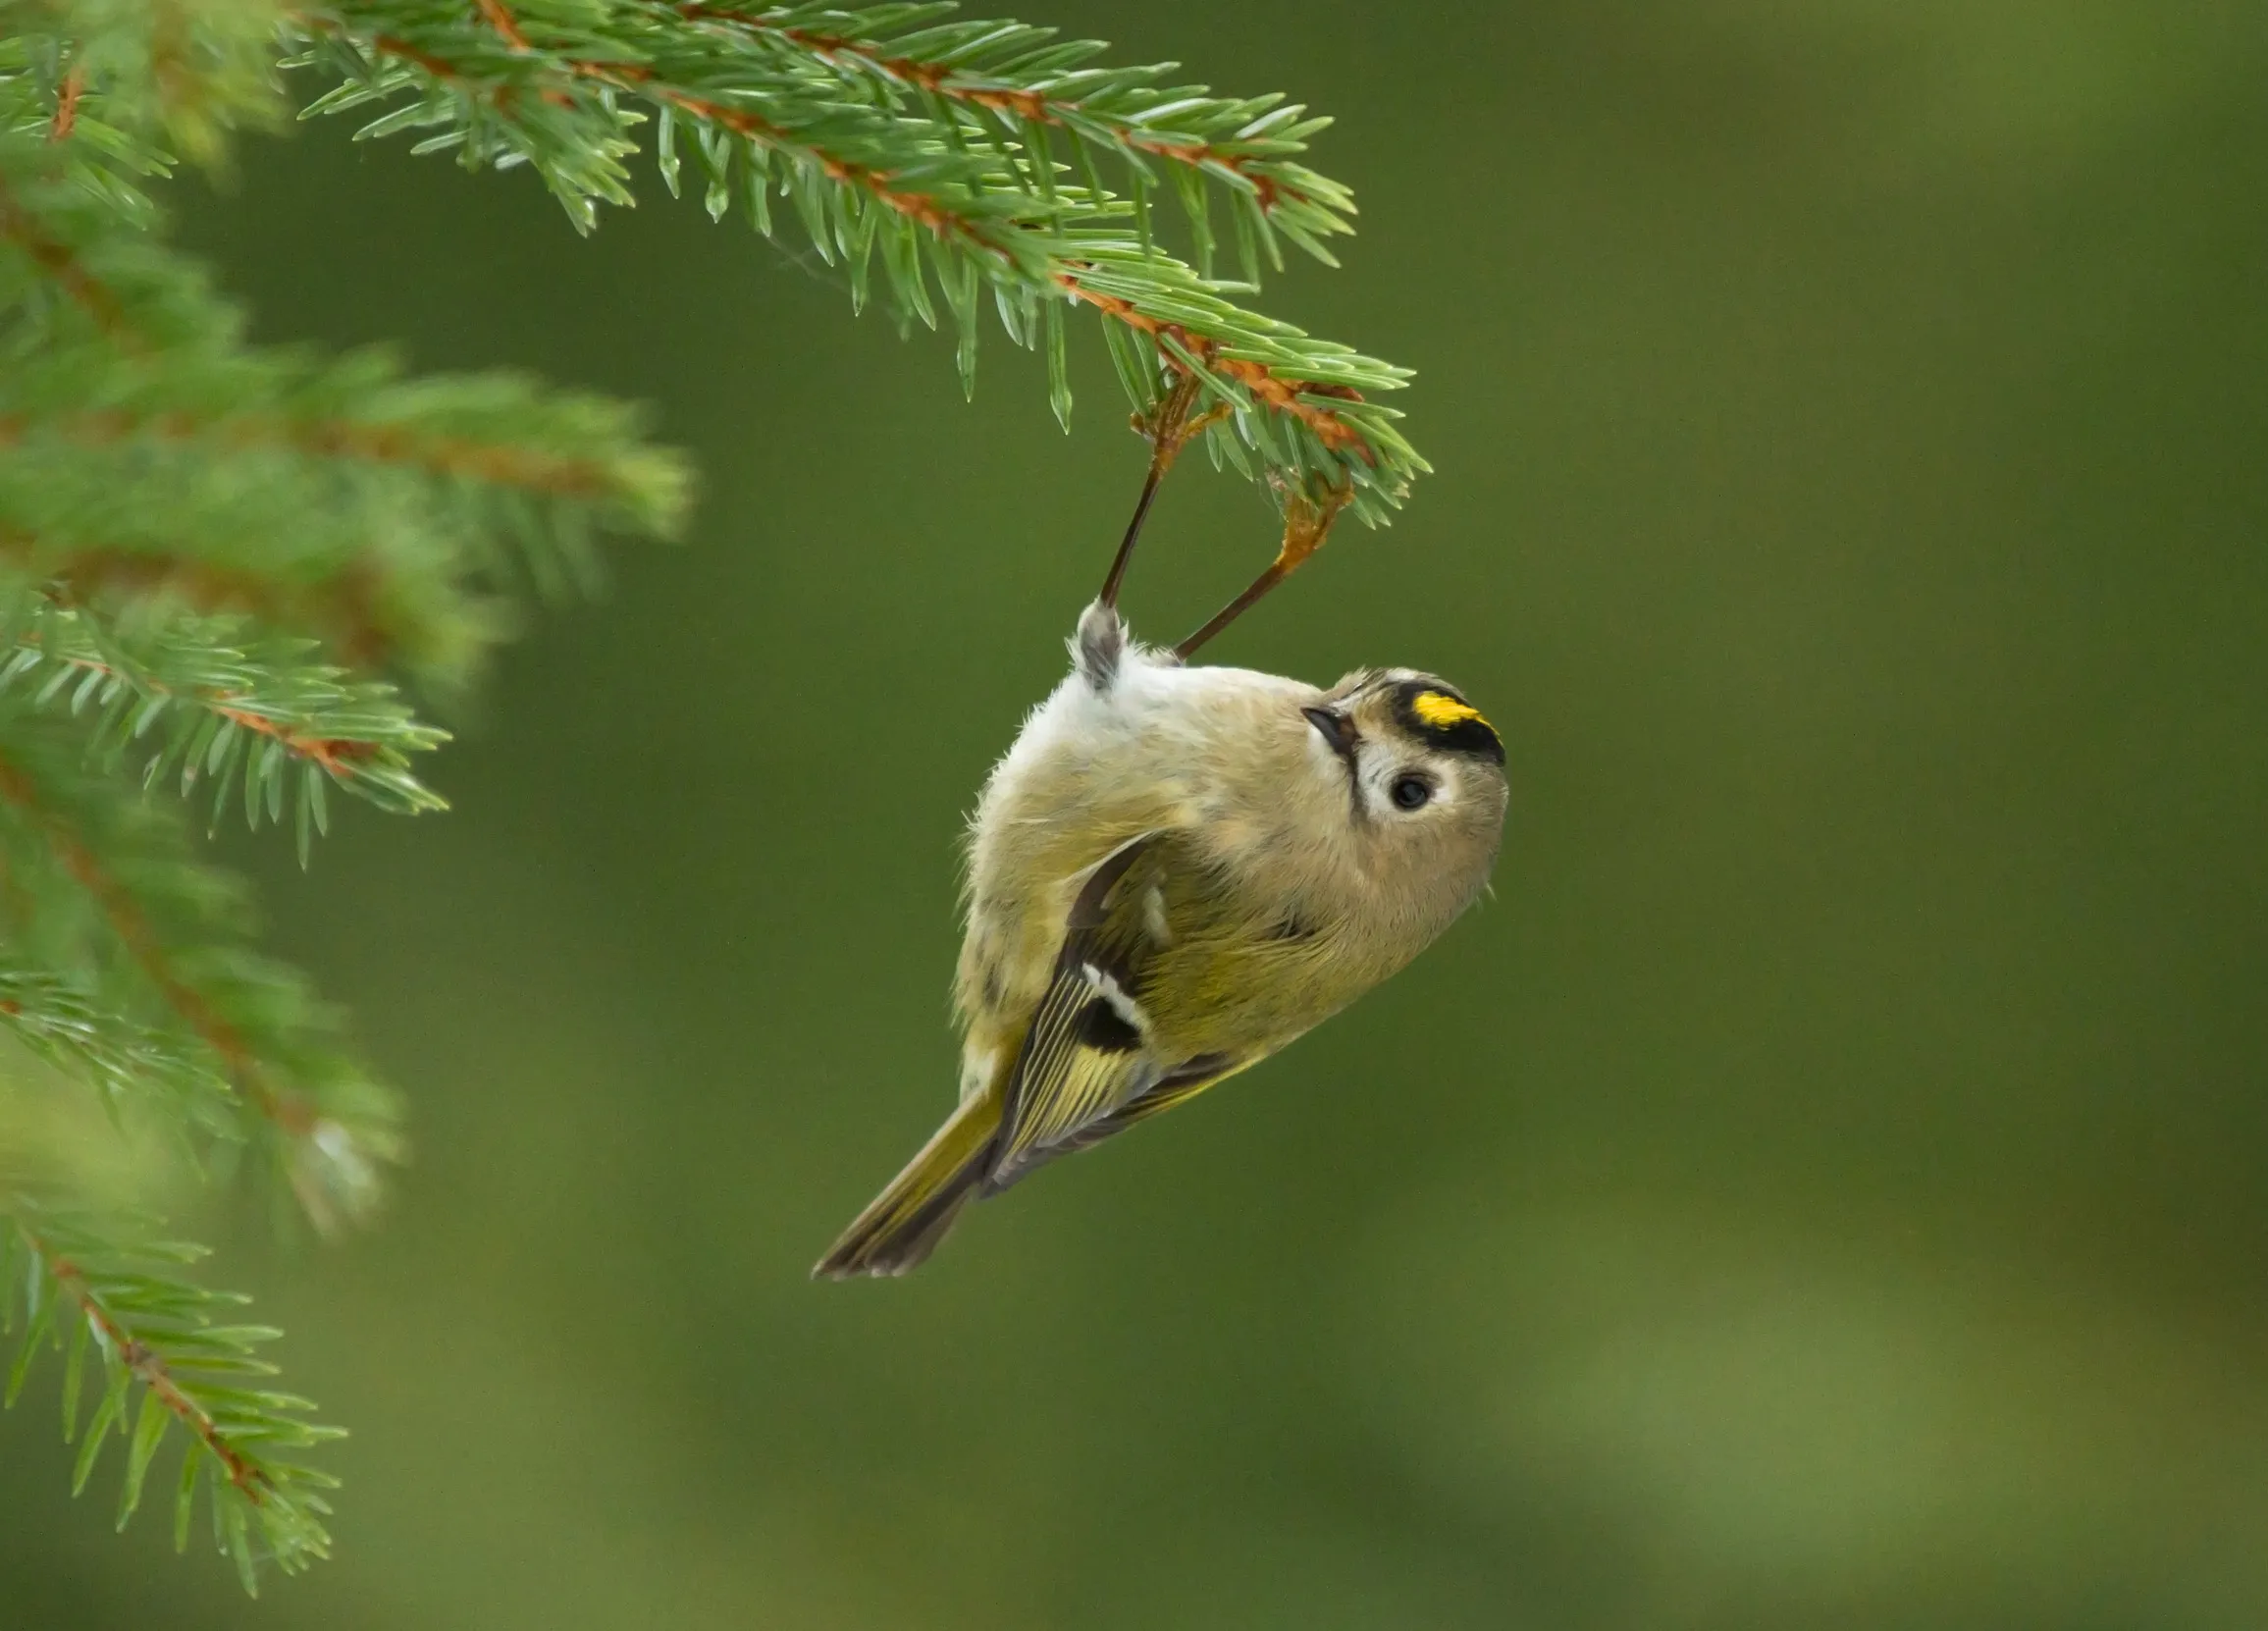 A lone Goldcrest hanging upside down from a pine tree.